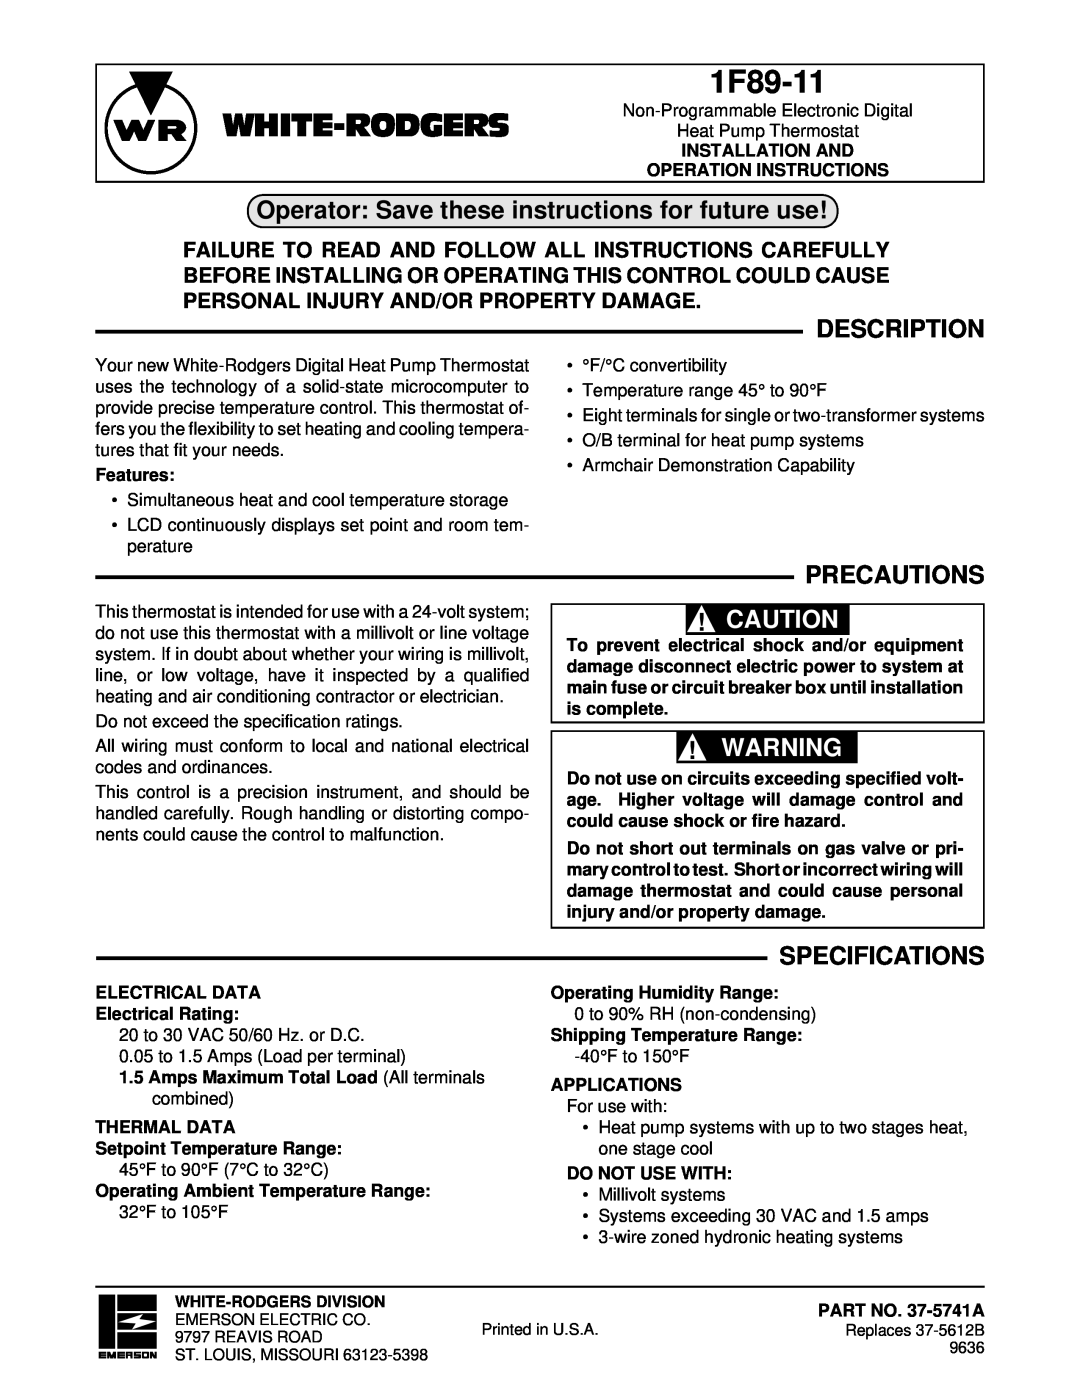 White Rodgers 1F89-11 specifications Operator Save these instructions for future use, Description, Precautions 